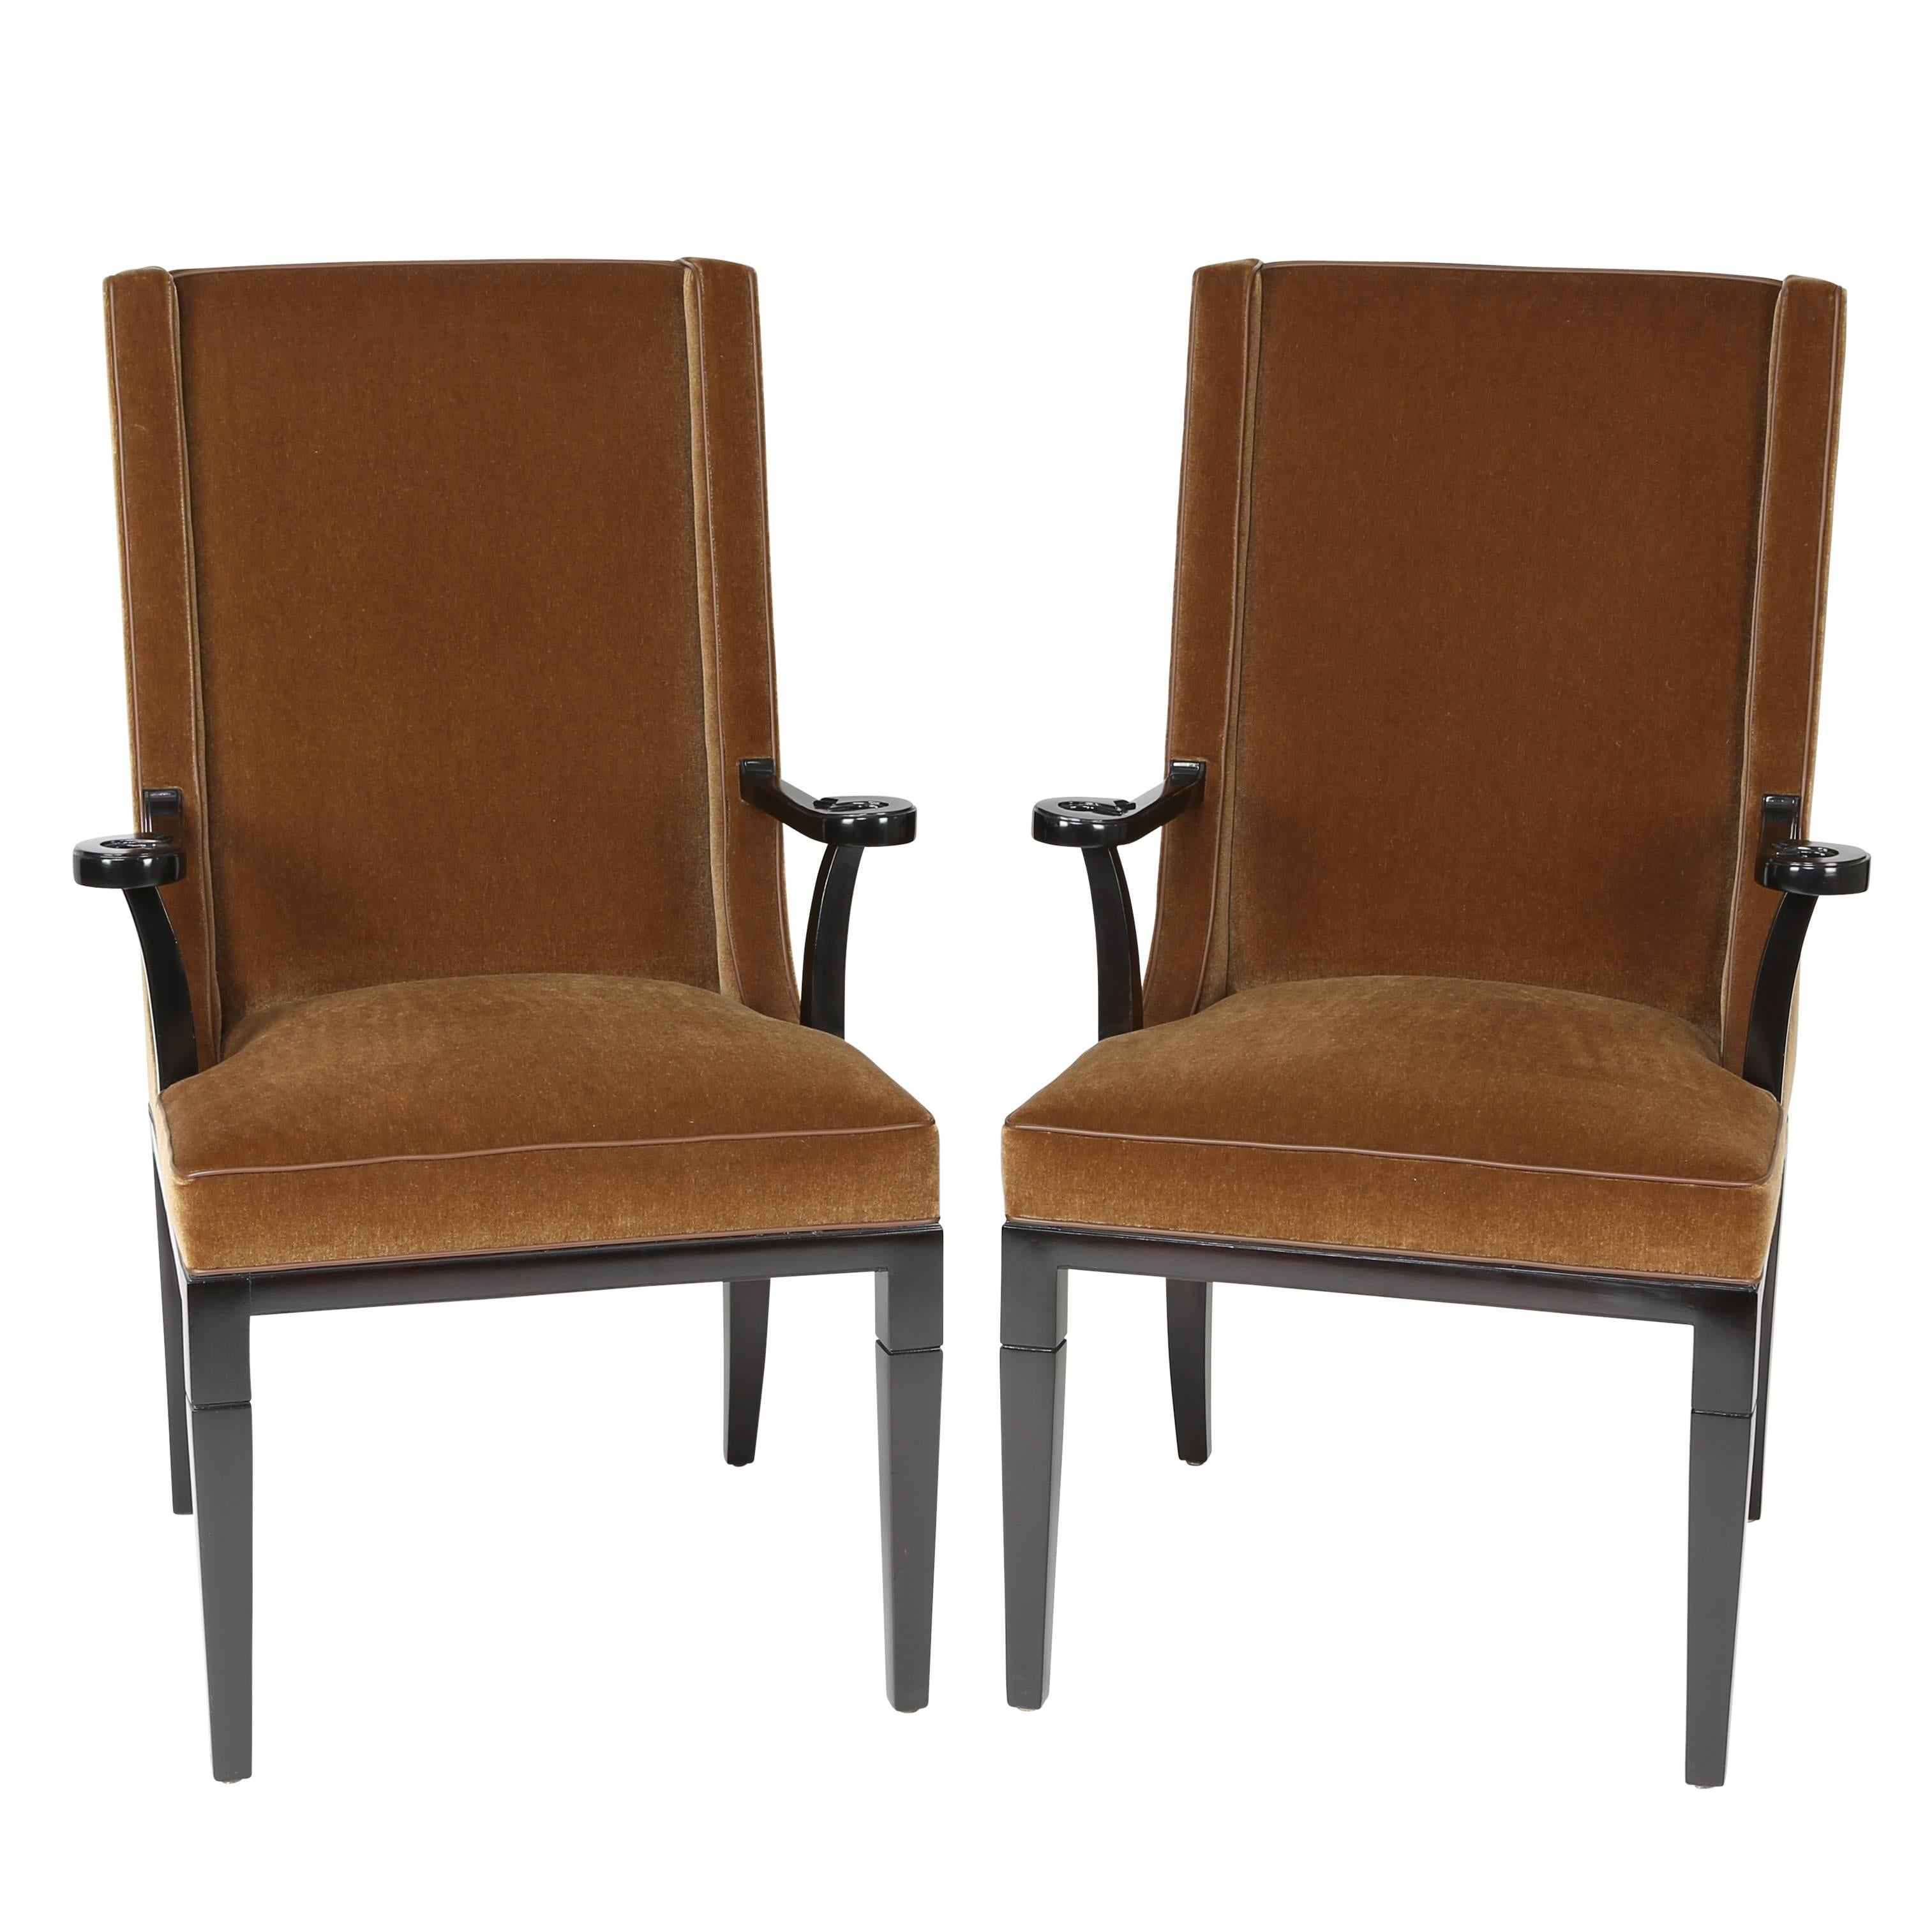 Pair of Armchairs by Tommi Parzinger for Charak Modern, circa 1940s For Sale